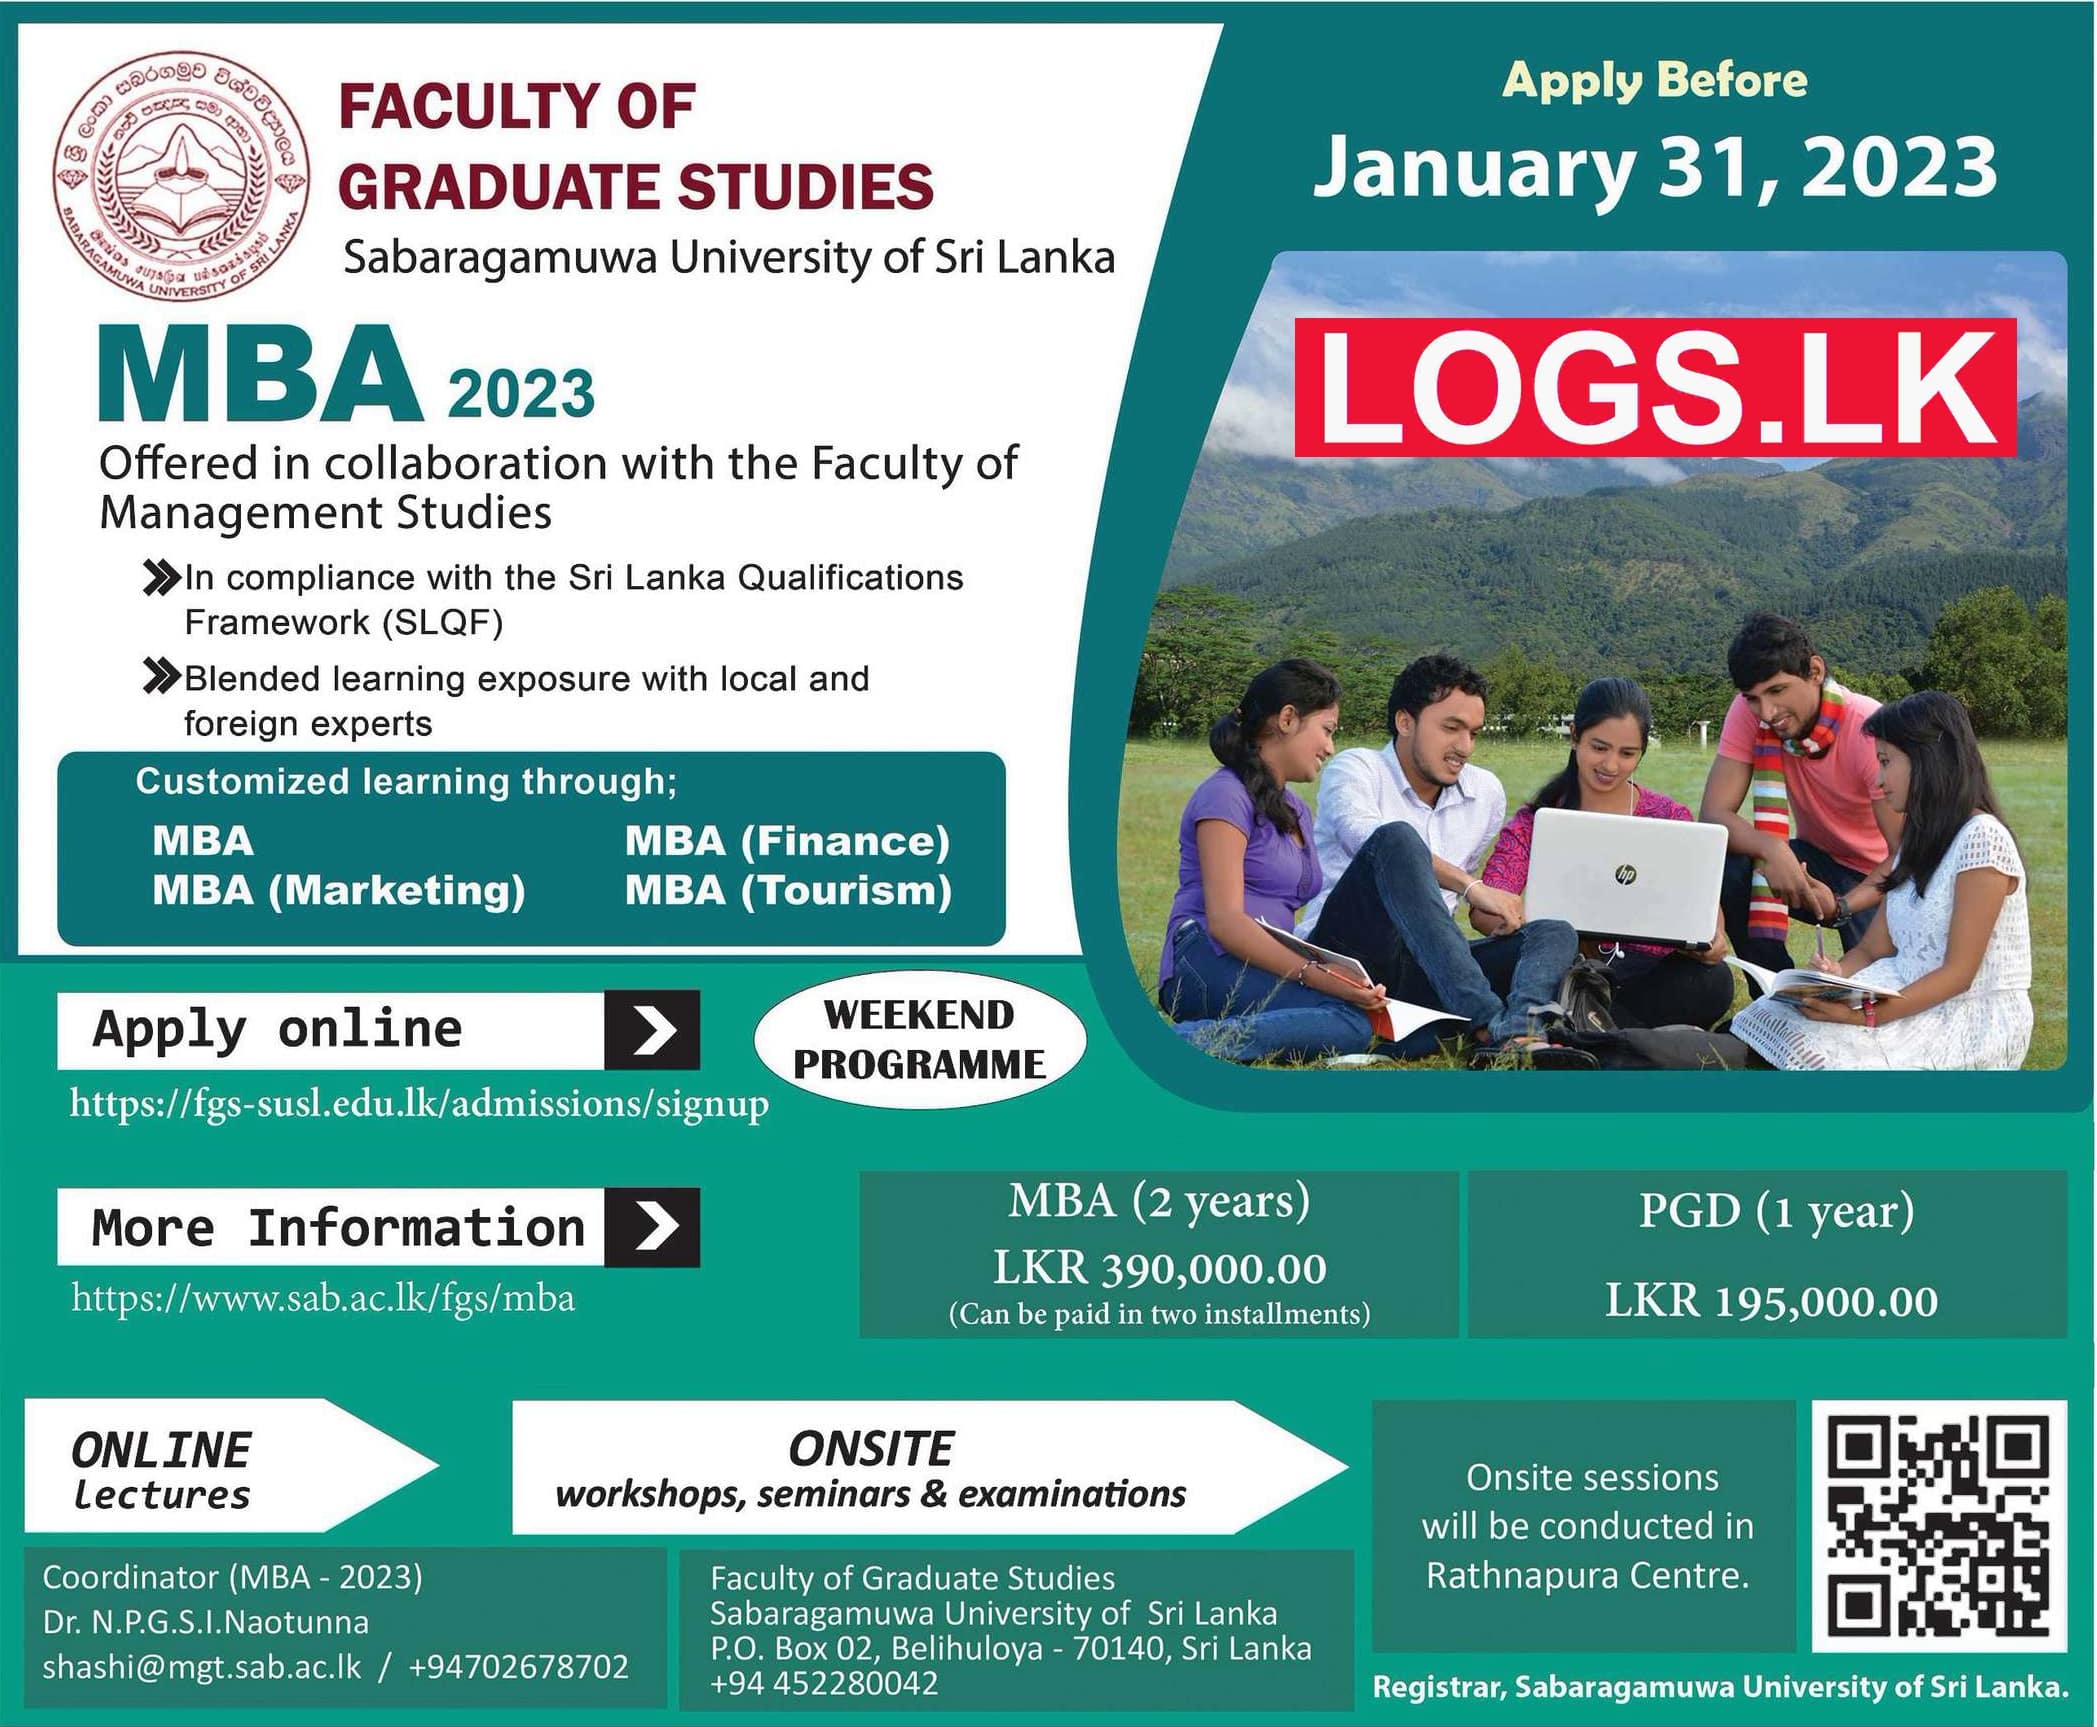 Master of Business Administration (MBA) 2023 - Sabaragamuwa University MBA Degree Programme 2023 Application Form Download, Apply Online